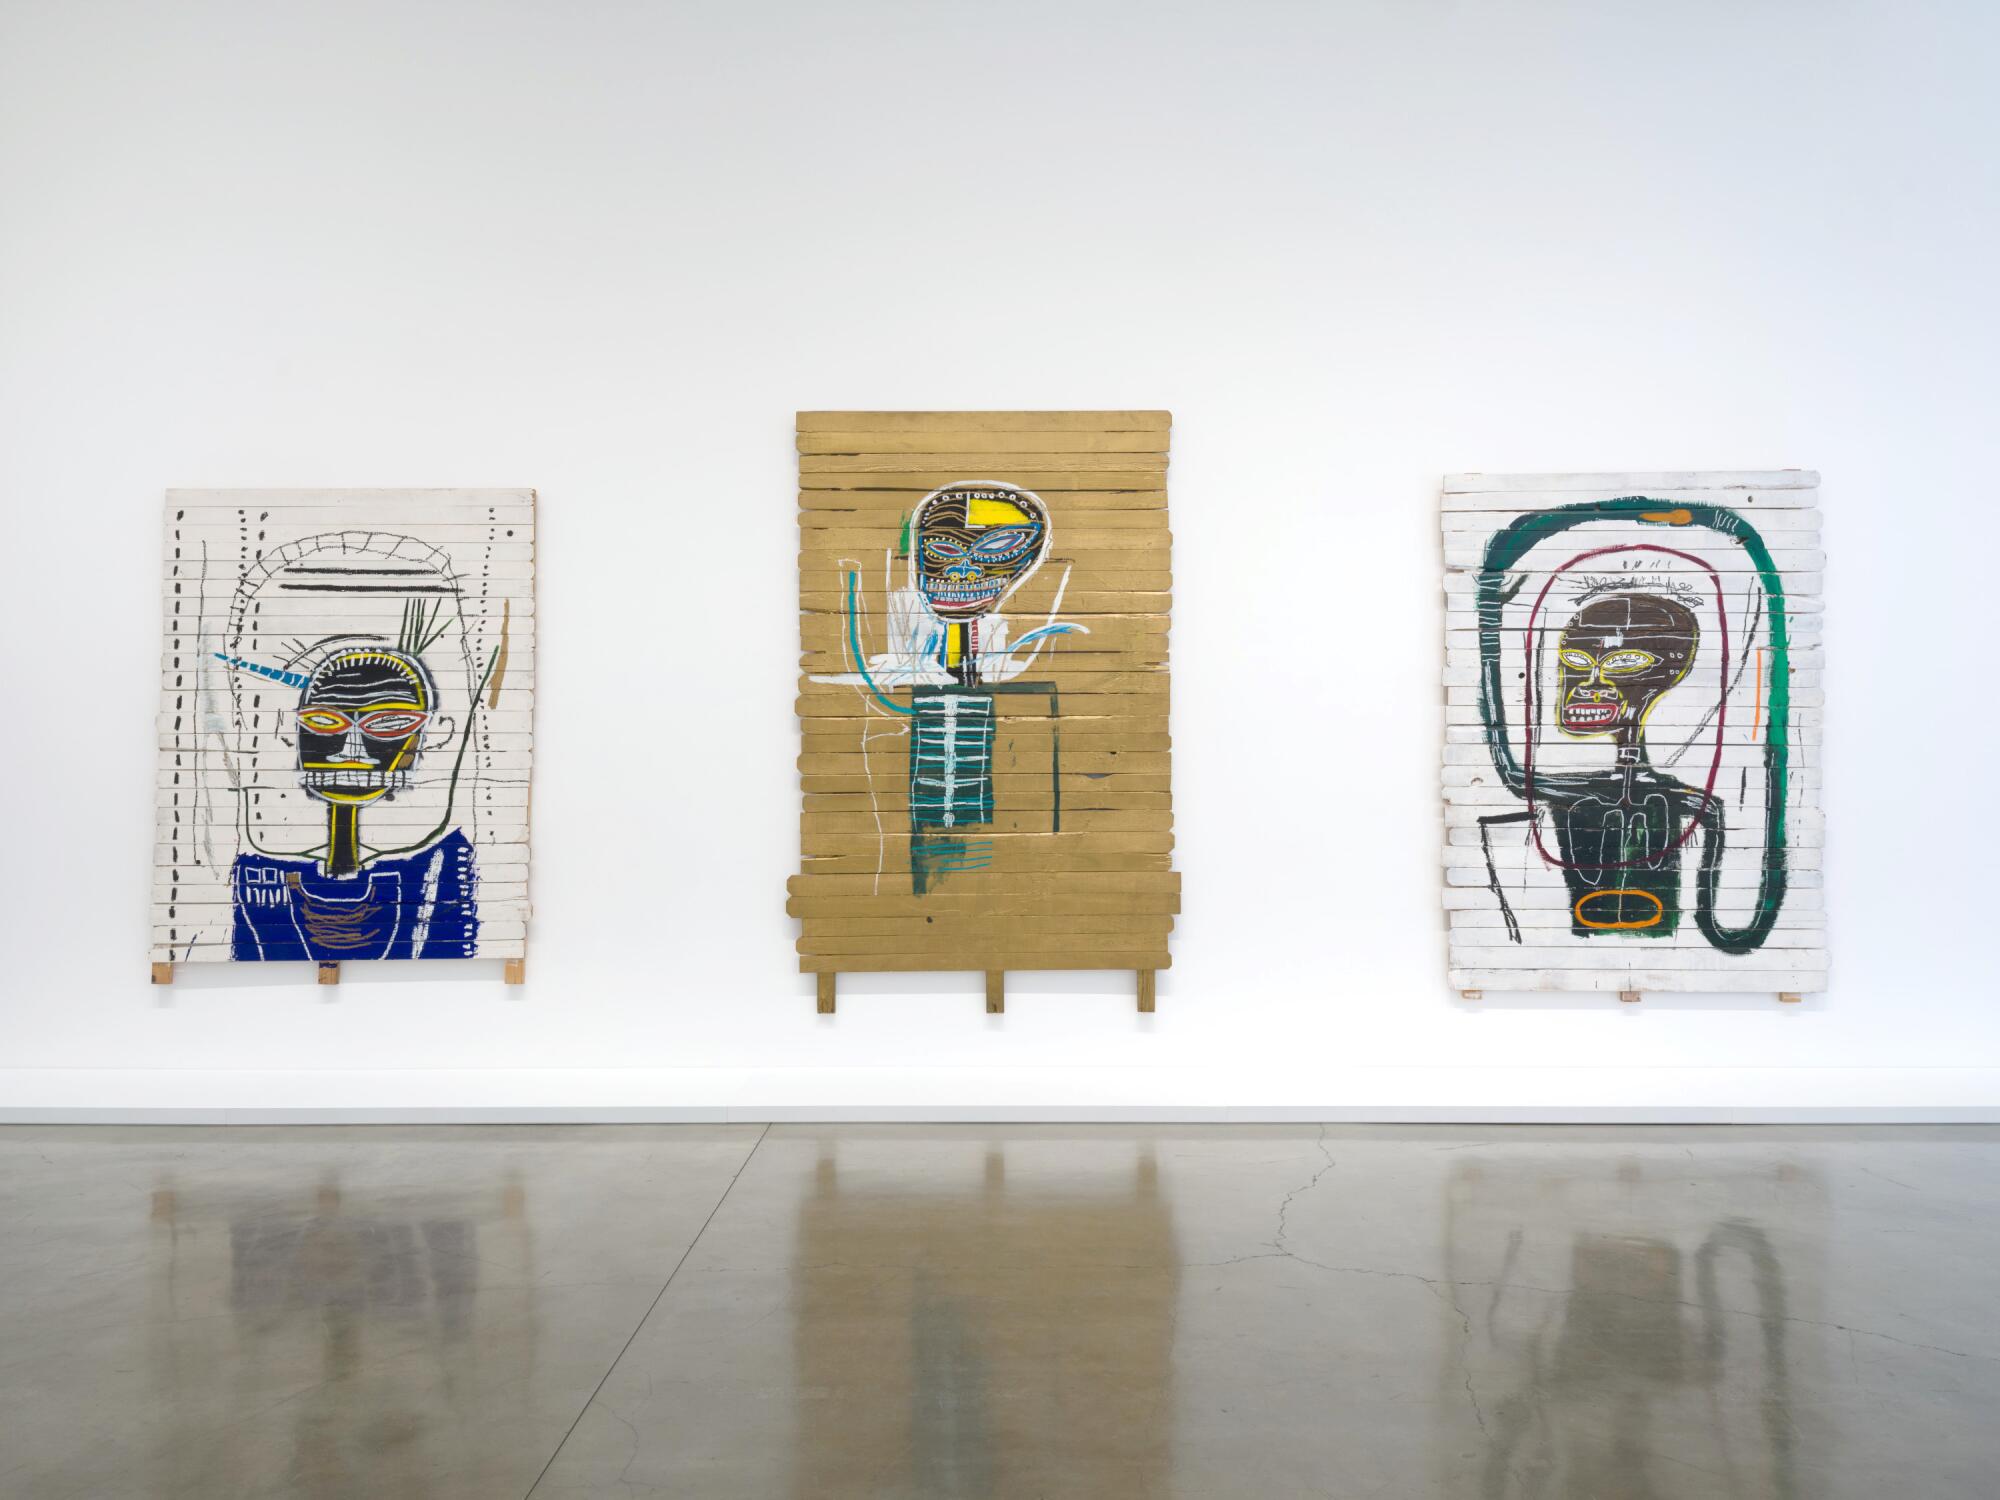 'Made on Market Street' premieres in Beverly Hills with paintings by Jean-Michel Basquiat.